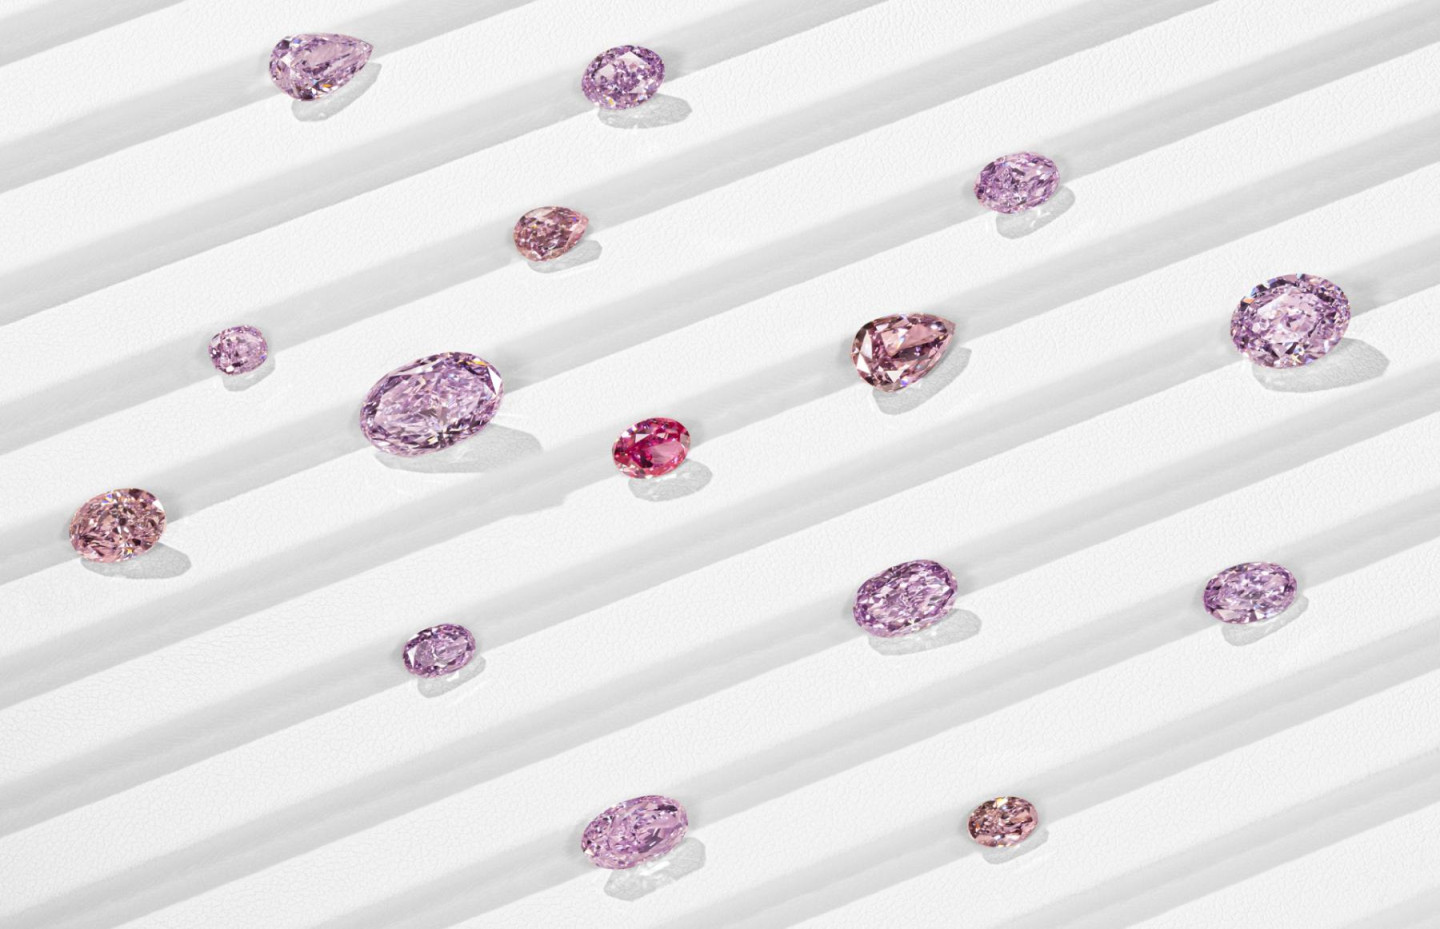 ALROSA presented a collection of 15 rare pink diamonds